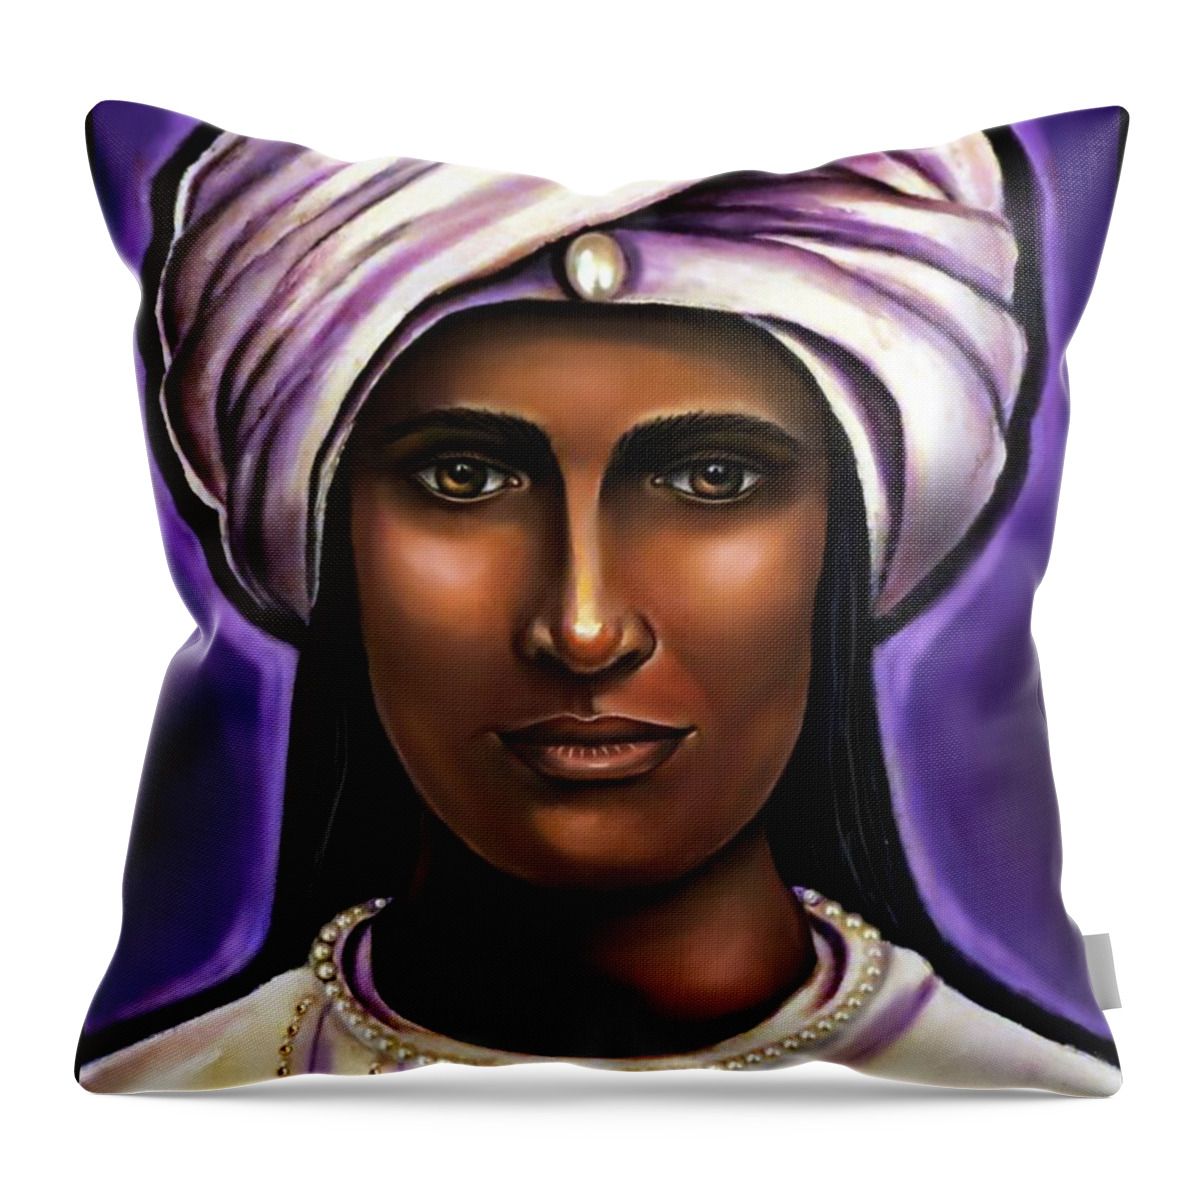 Spirit Guide Throw Pillow featuring the painting Spirit Guide 1 by Carmen Cordova